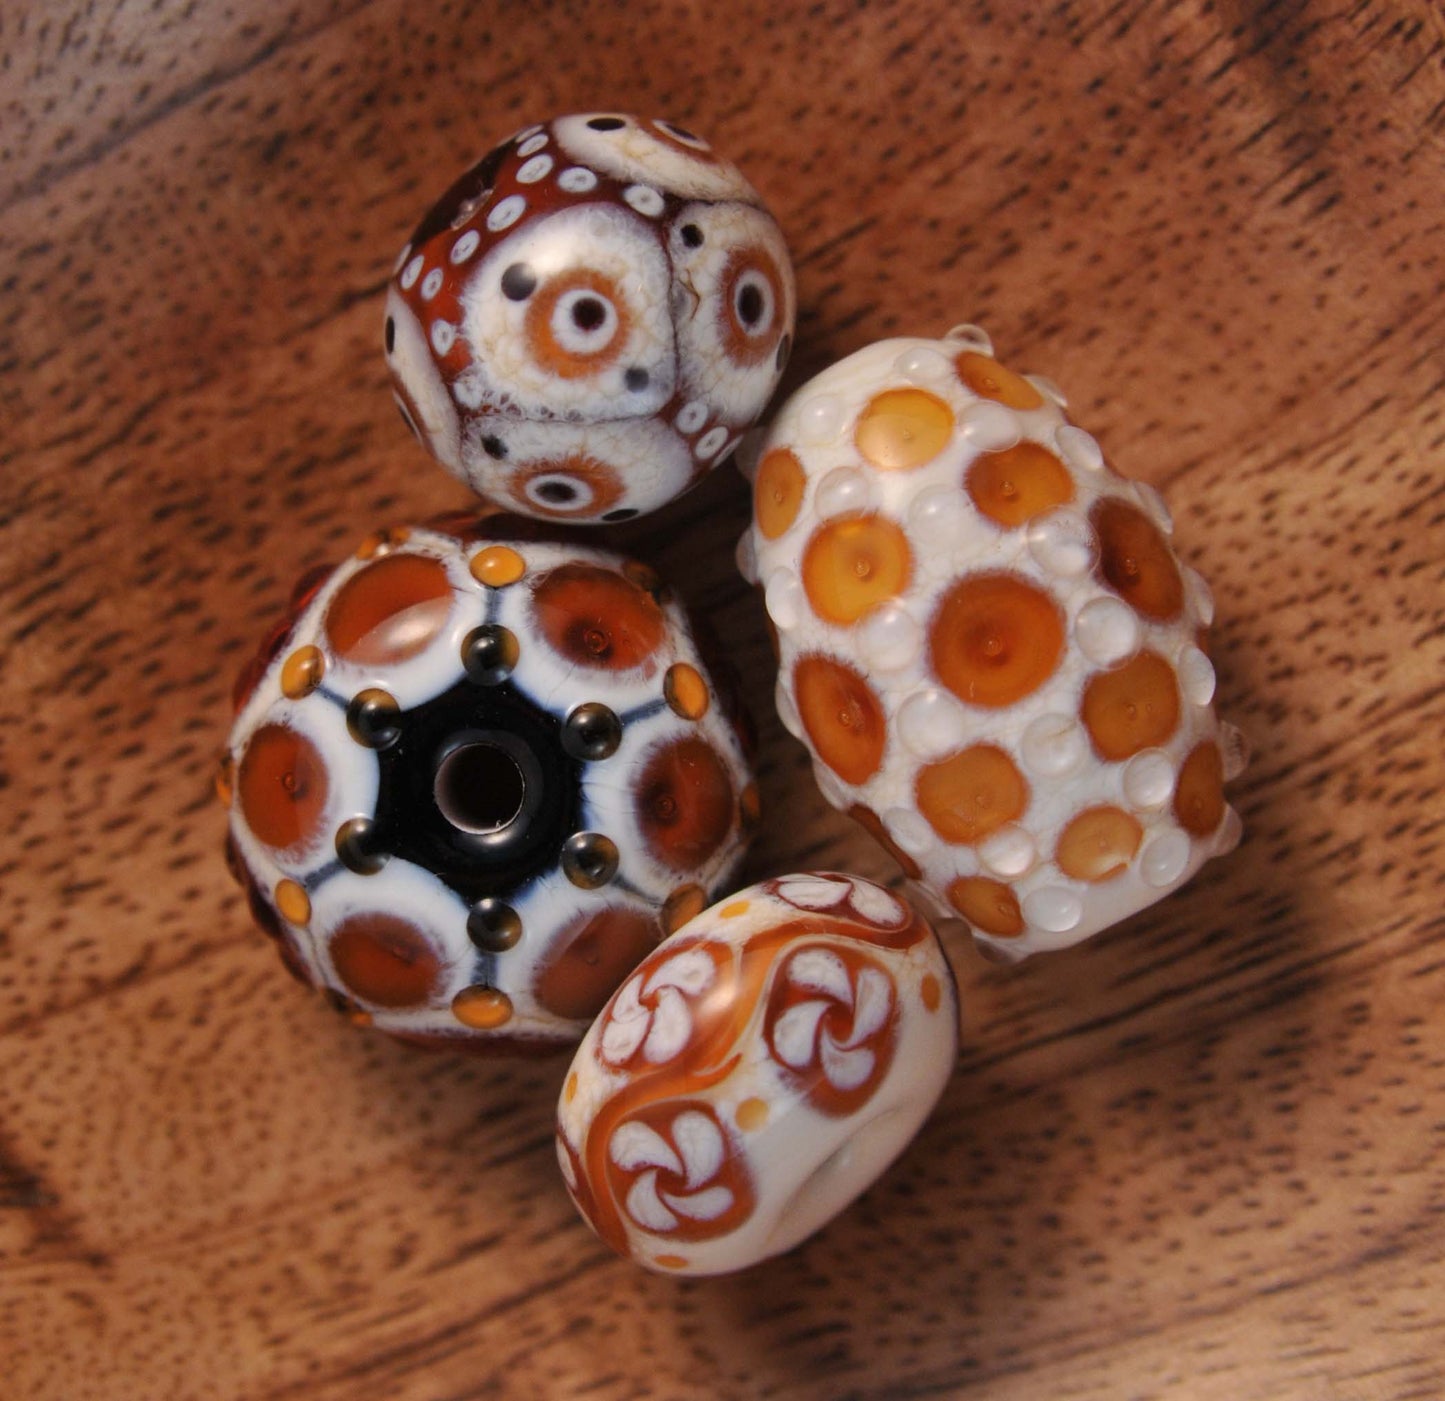 In-depth lampwork glass beads class with Nathalie Crottaz - February 19th, 2023